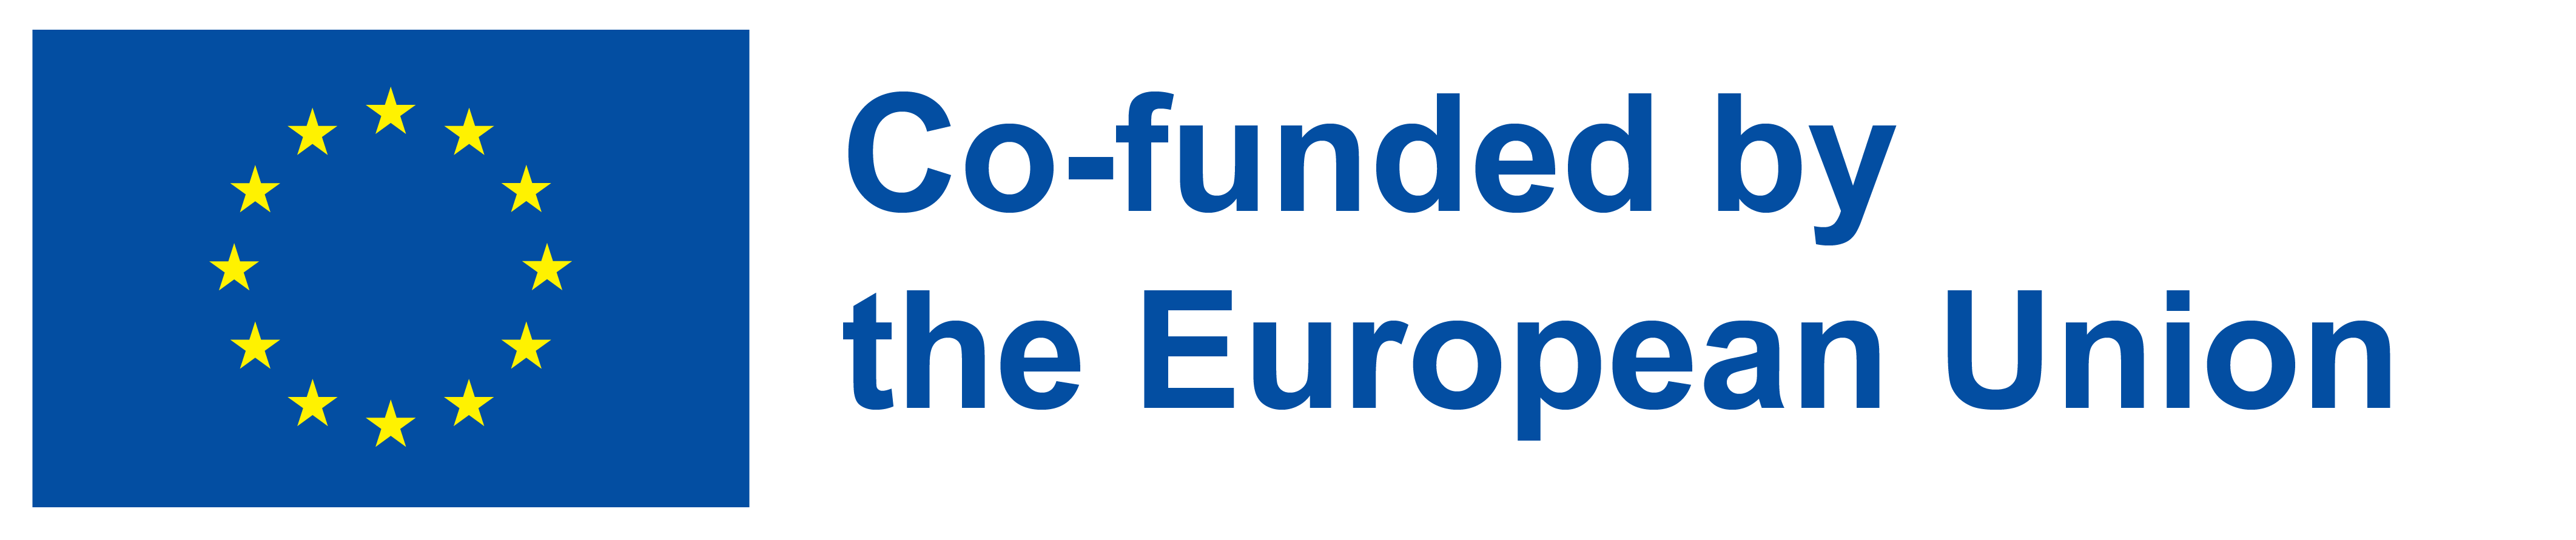 Co-funded by the European Union banner